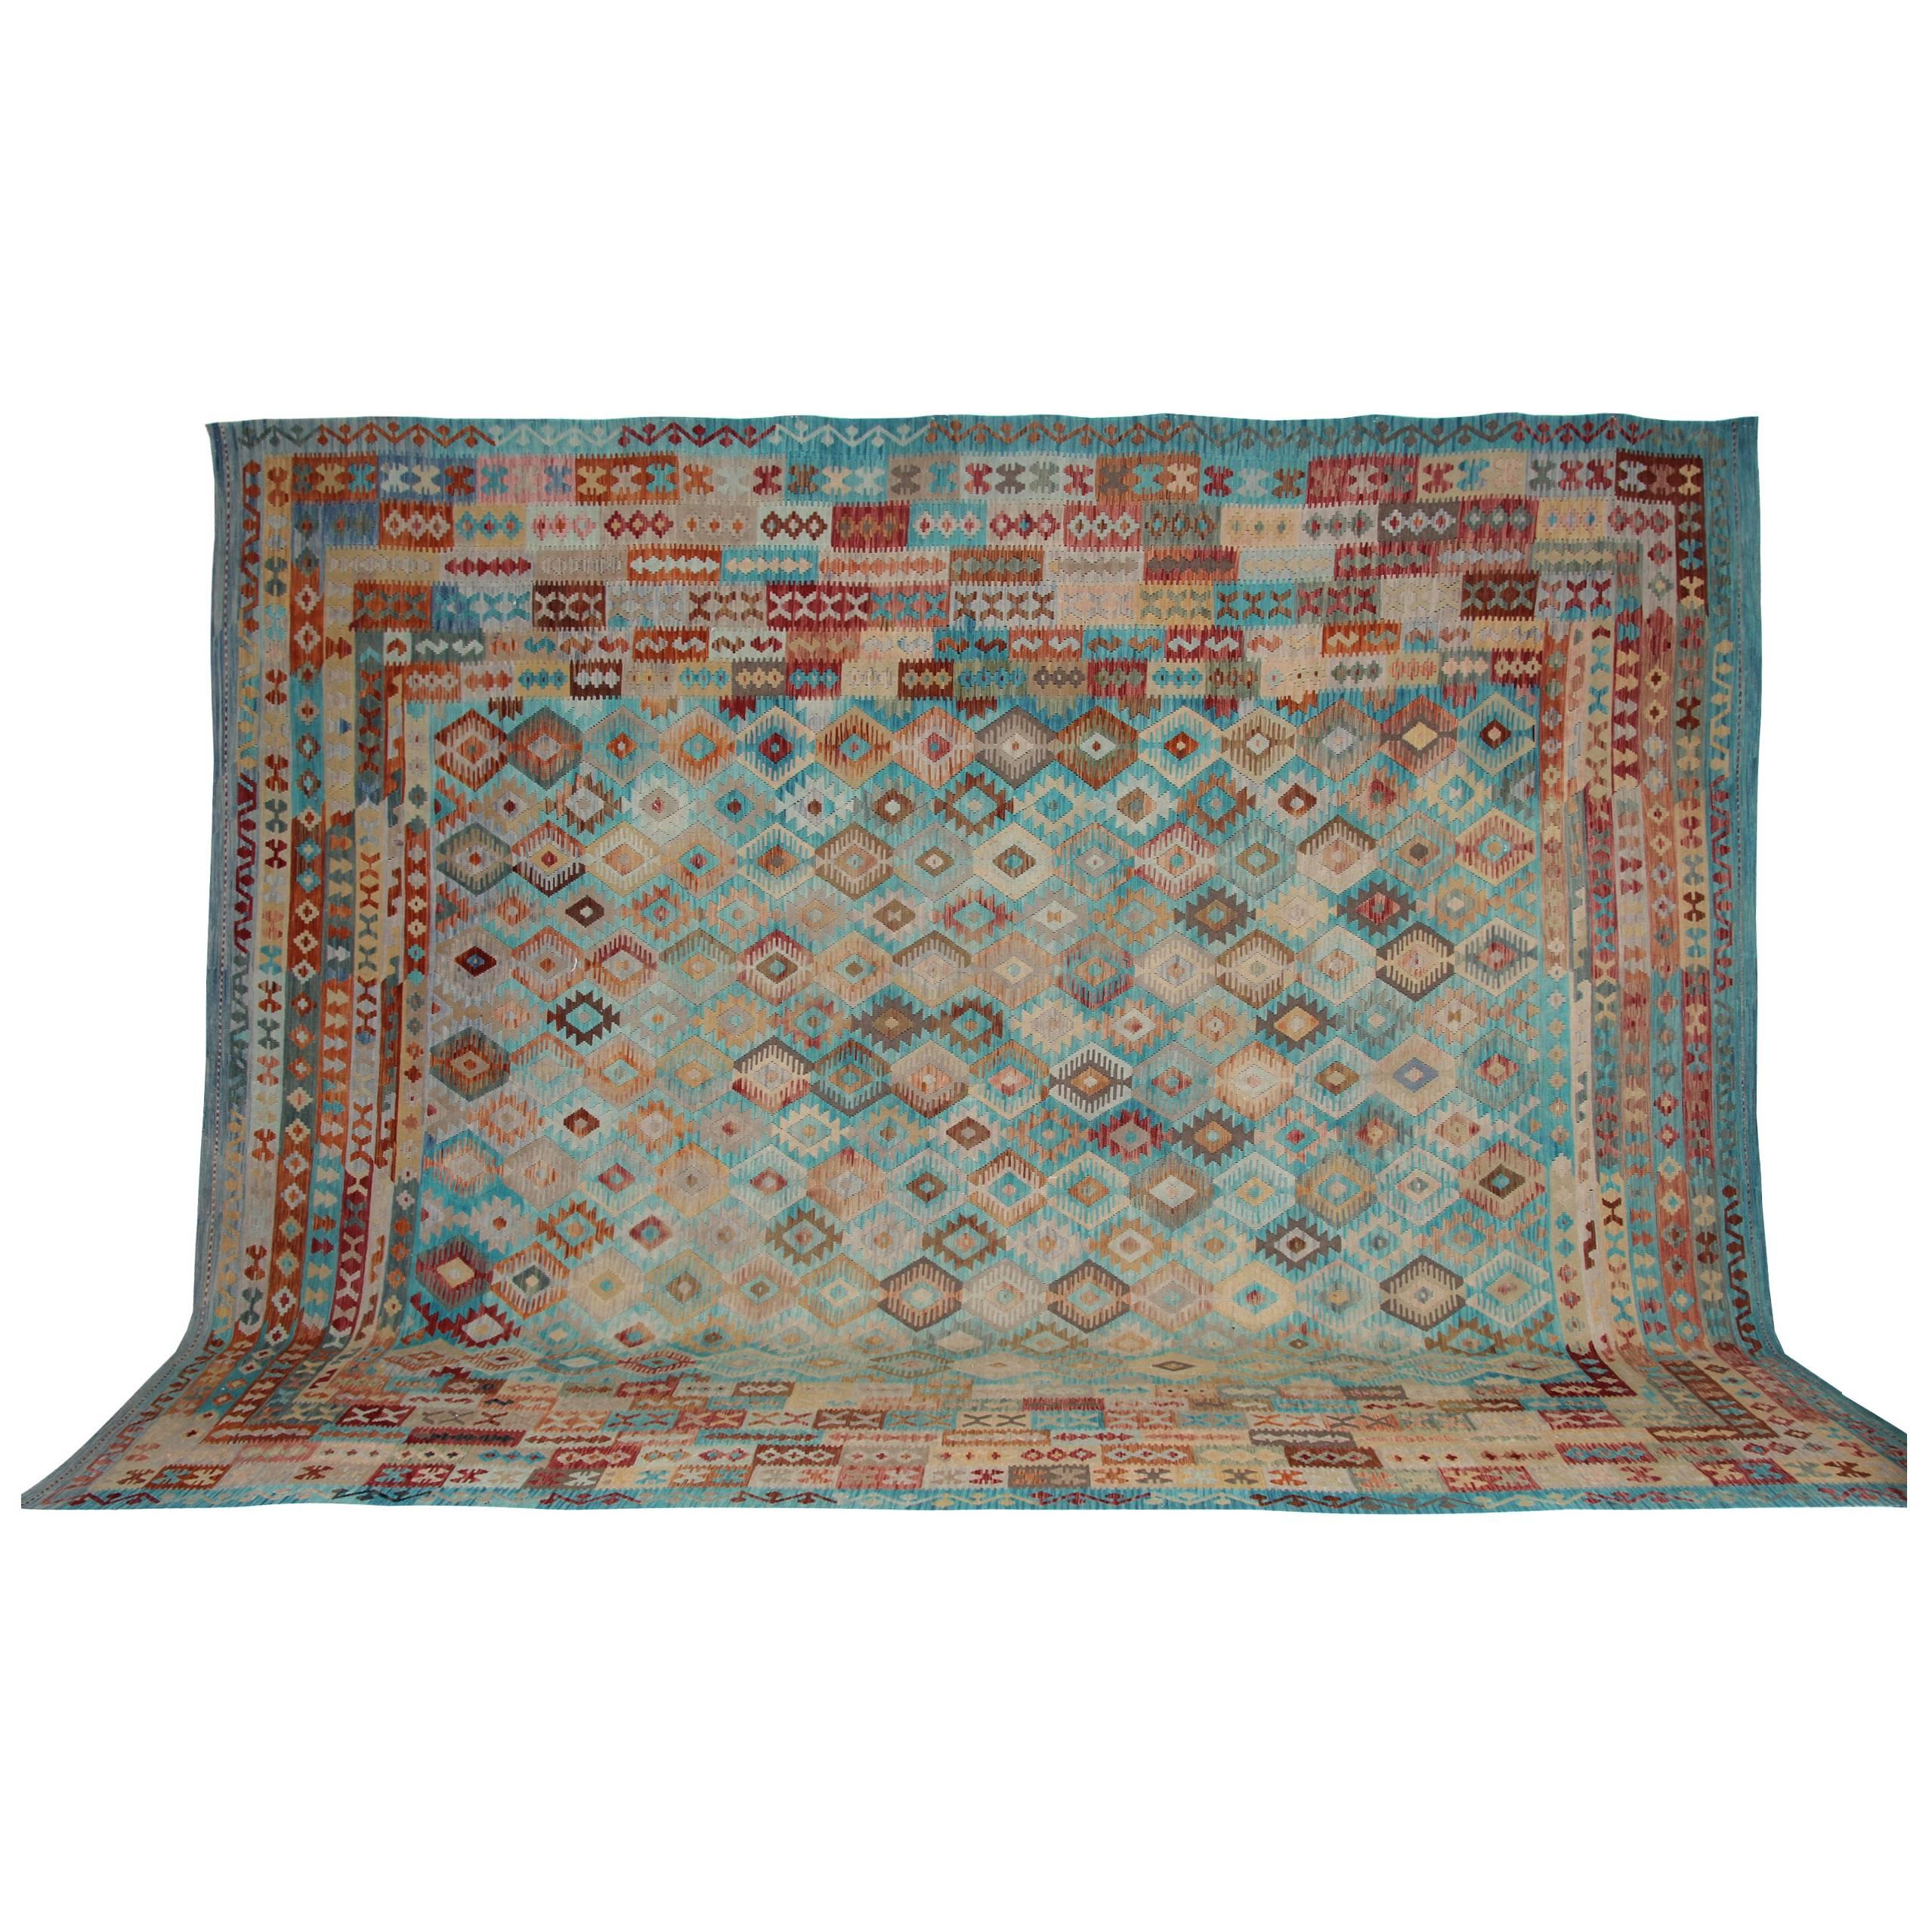 Afghan Rugs, Kilim Rugs with salmon and tourquise blue colors